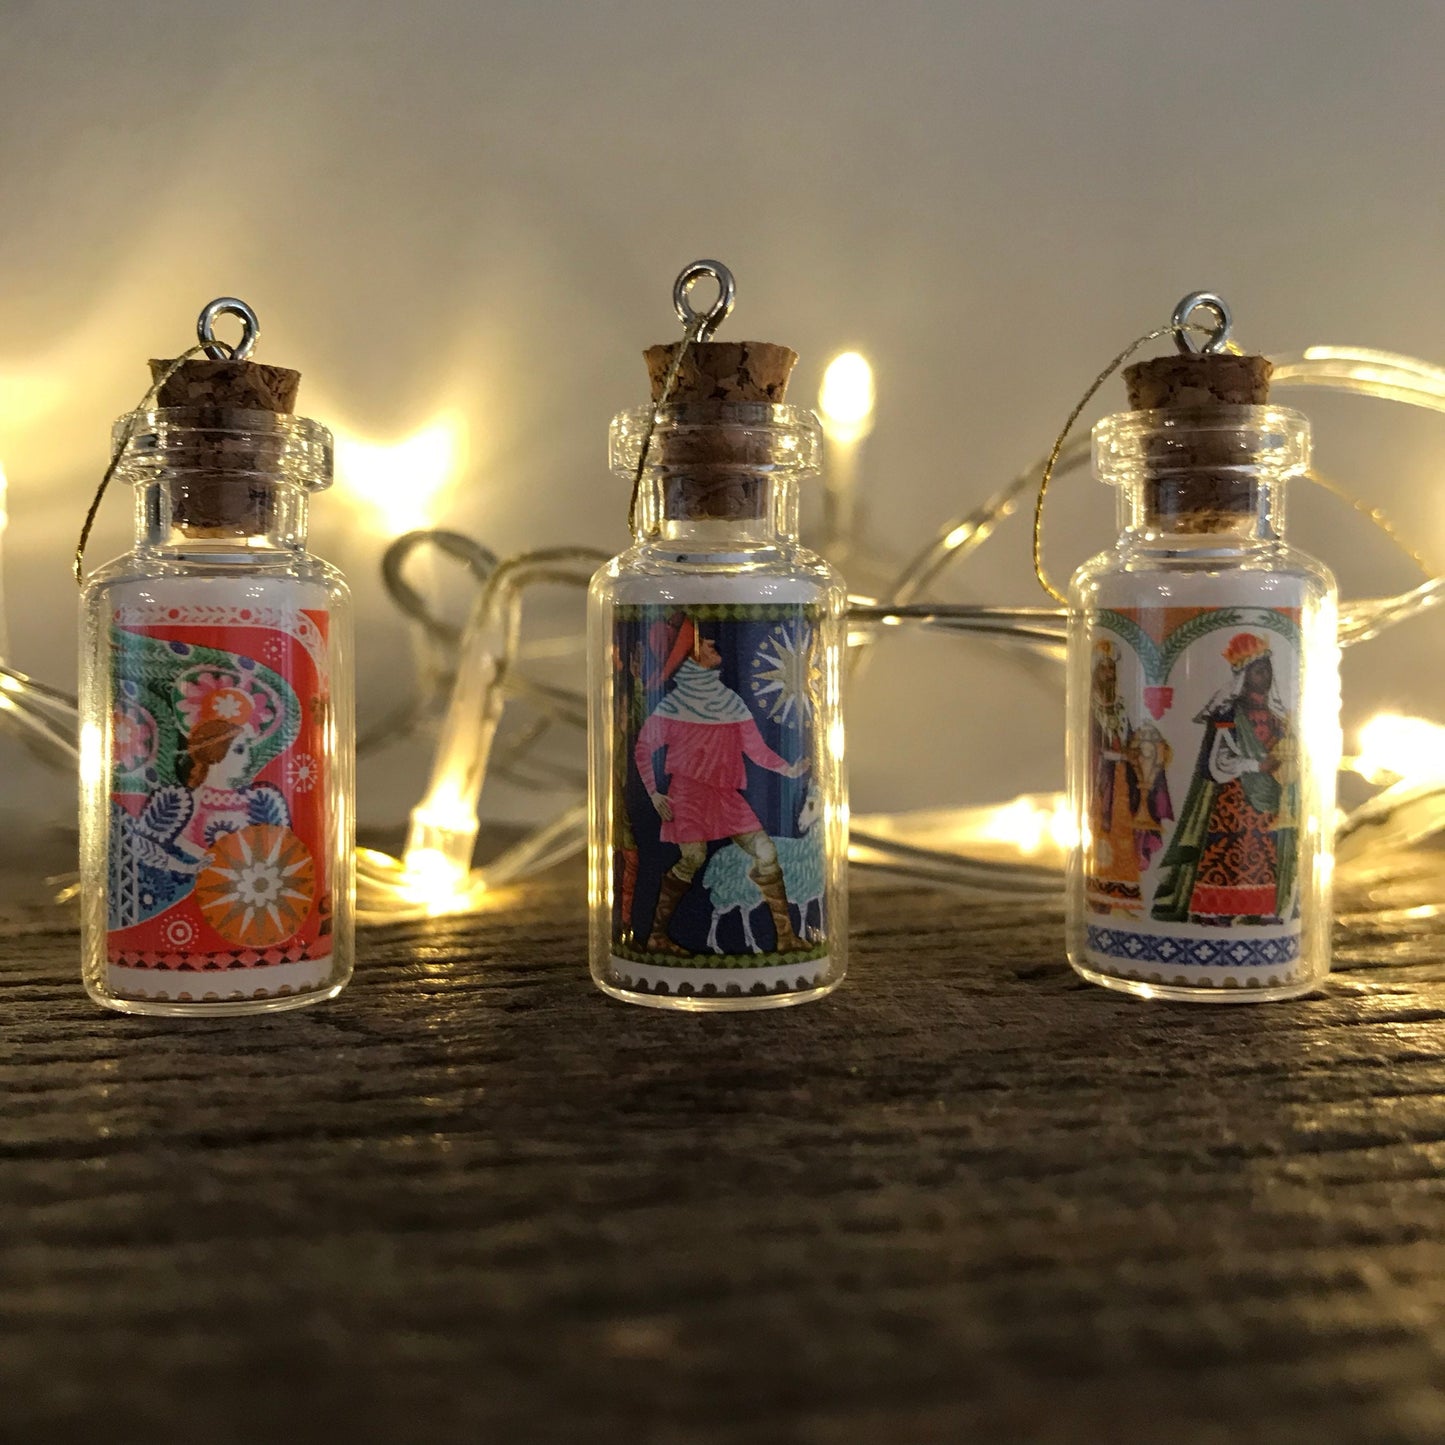 Christmas Postage Stamps in Miniature Bottles (1969, Set of 3)